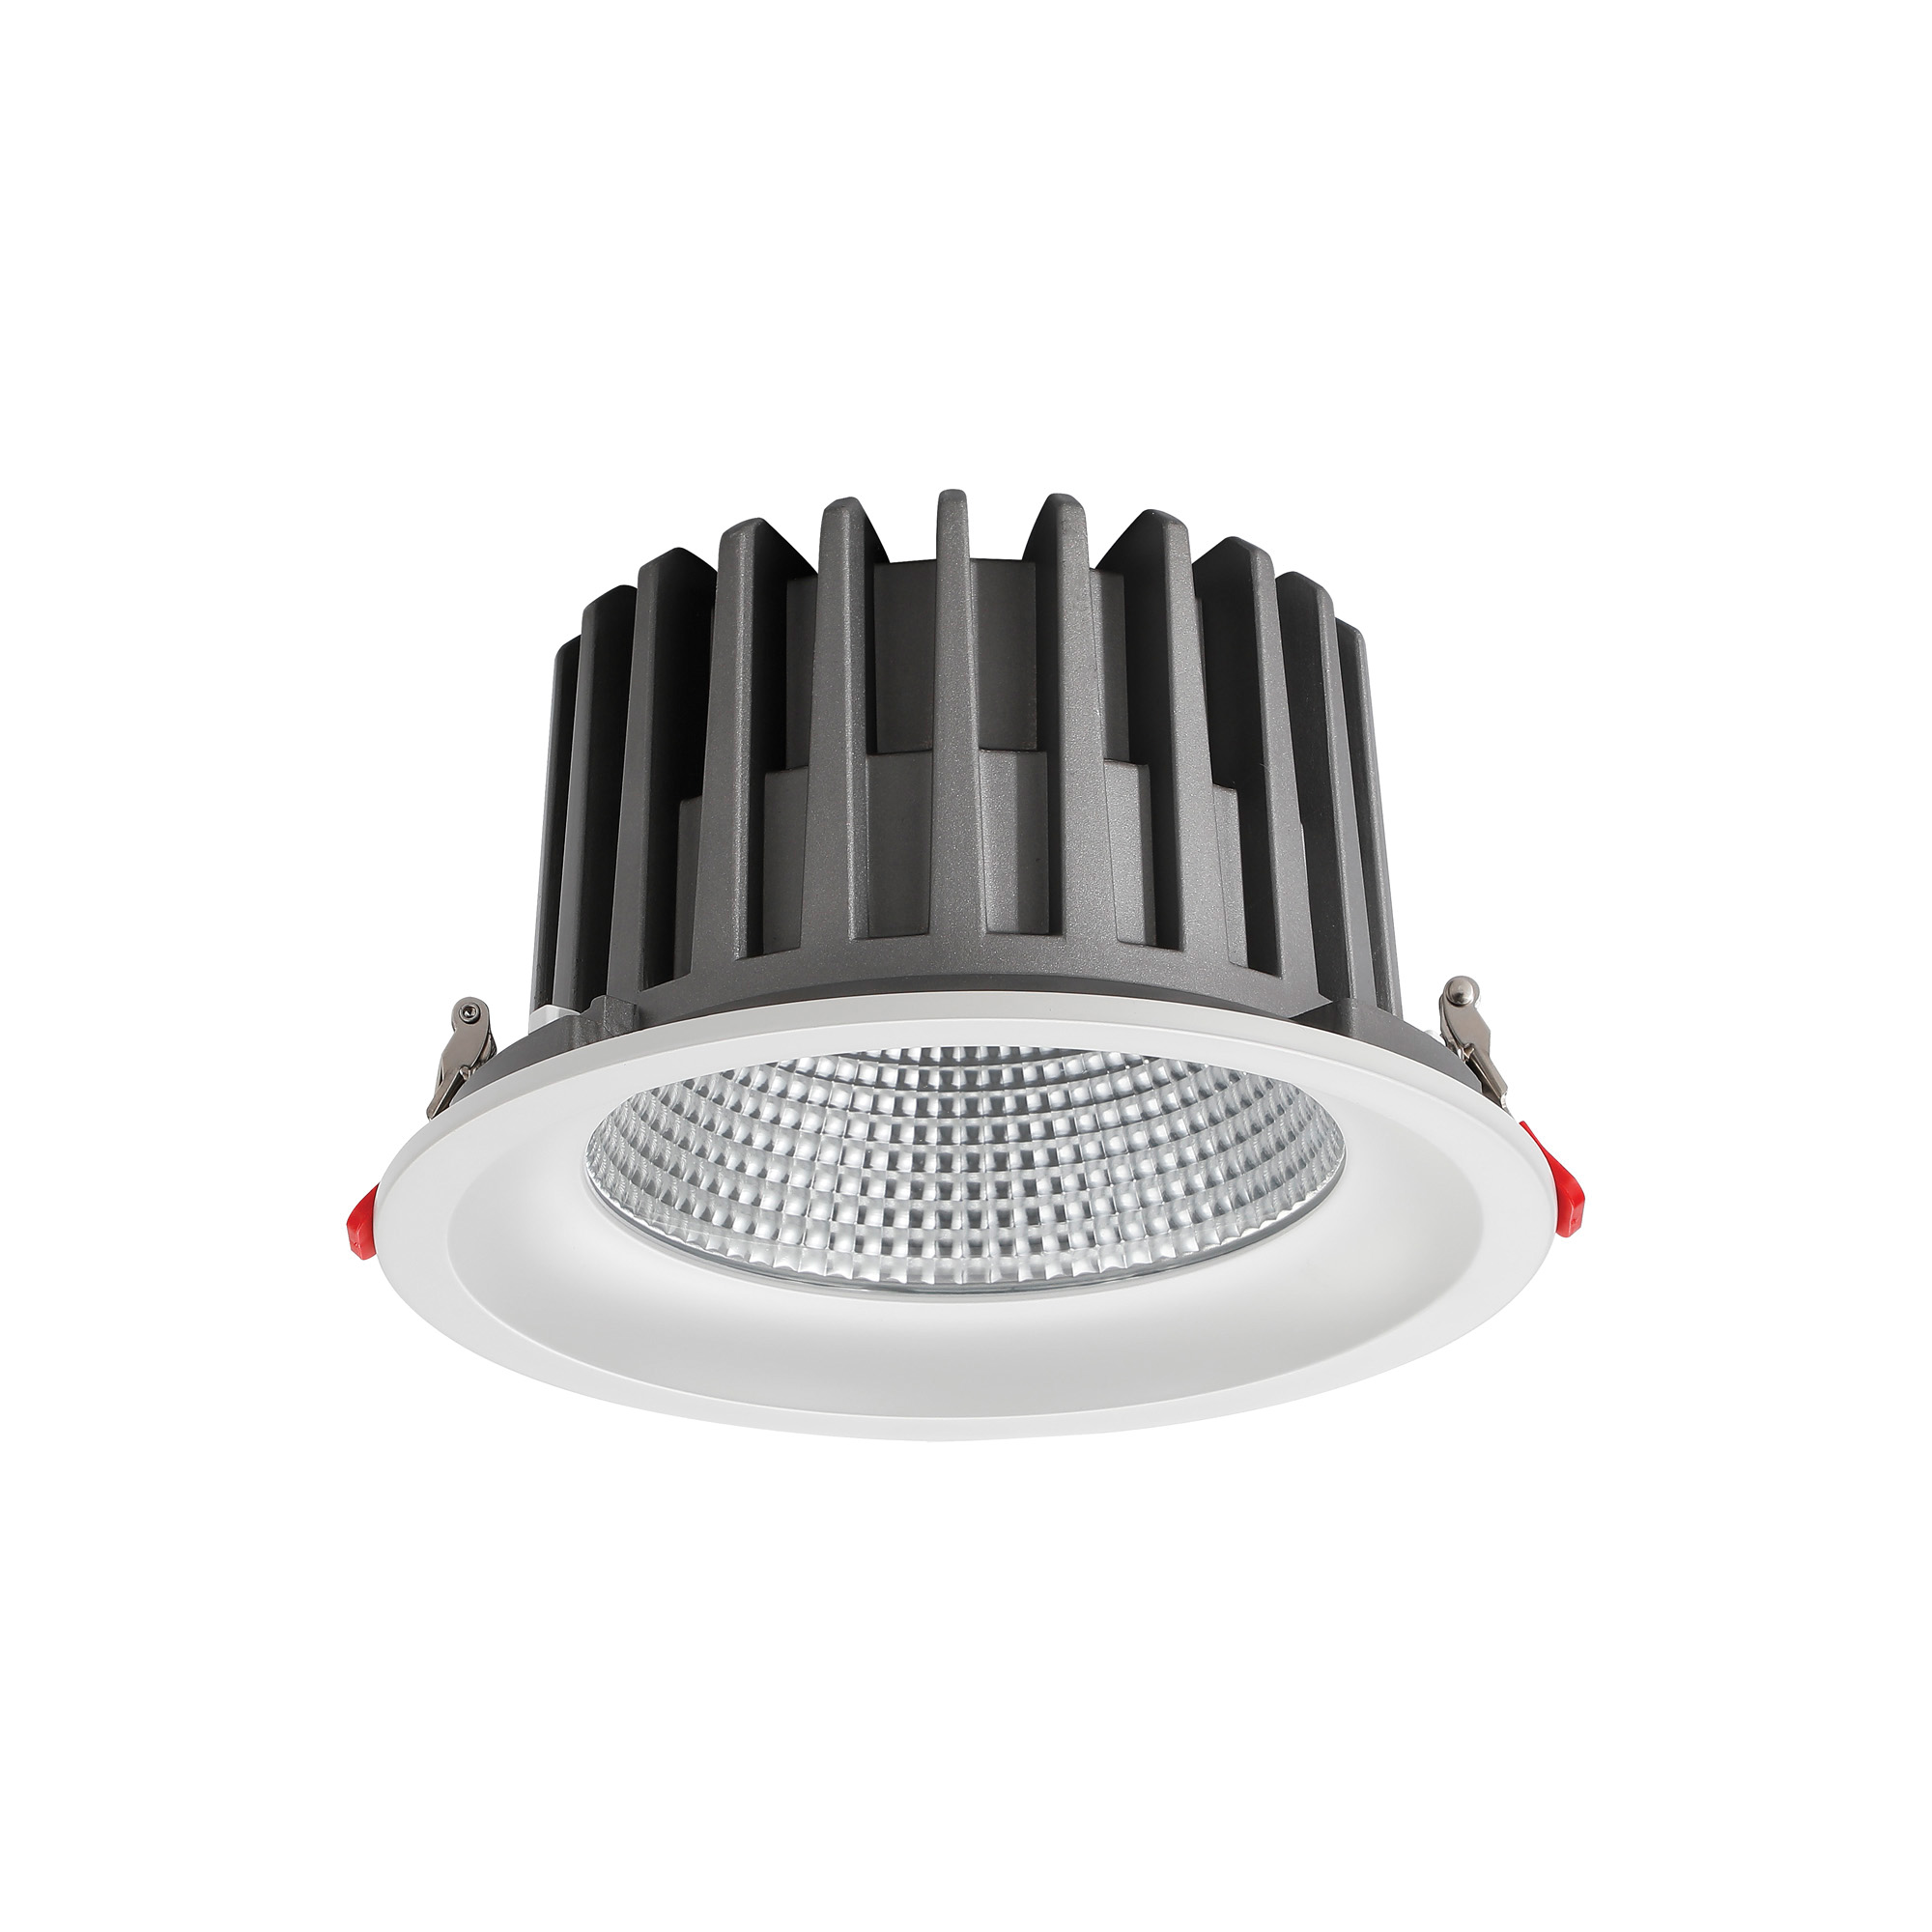 DL200068  Bionic 50; 50W; 1200mA; White Deep Round Recessed Downlight; 4400lm ;Cut Out 175mm; 50° ; 4000K; IP44; DRIVER INC.; 5yrs Warranty.